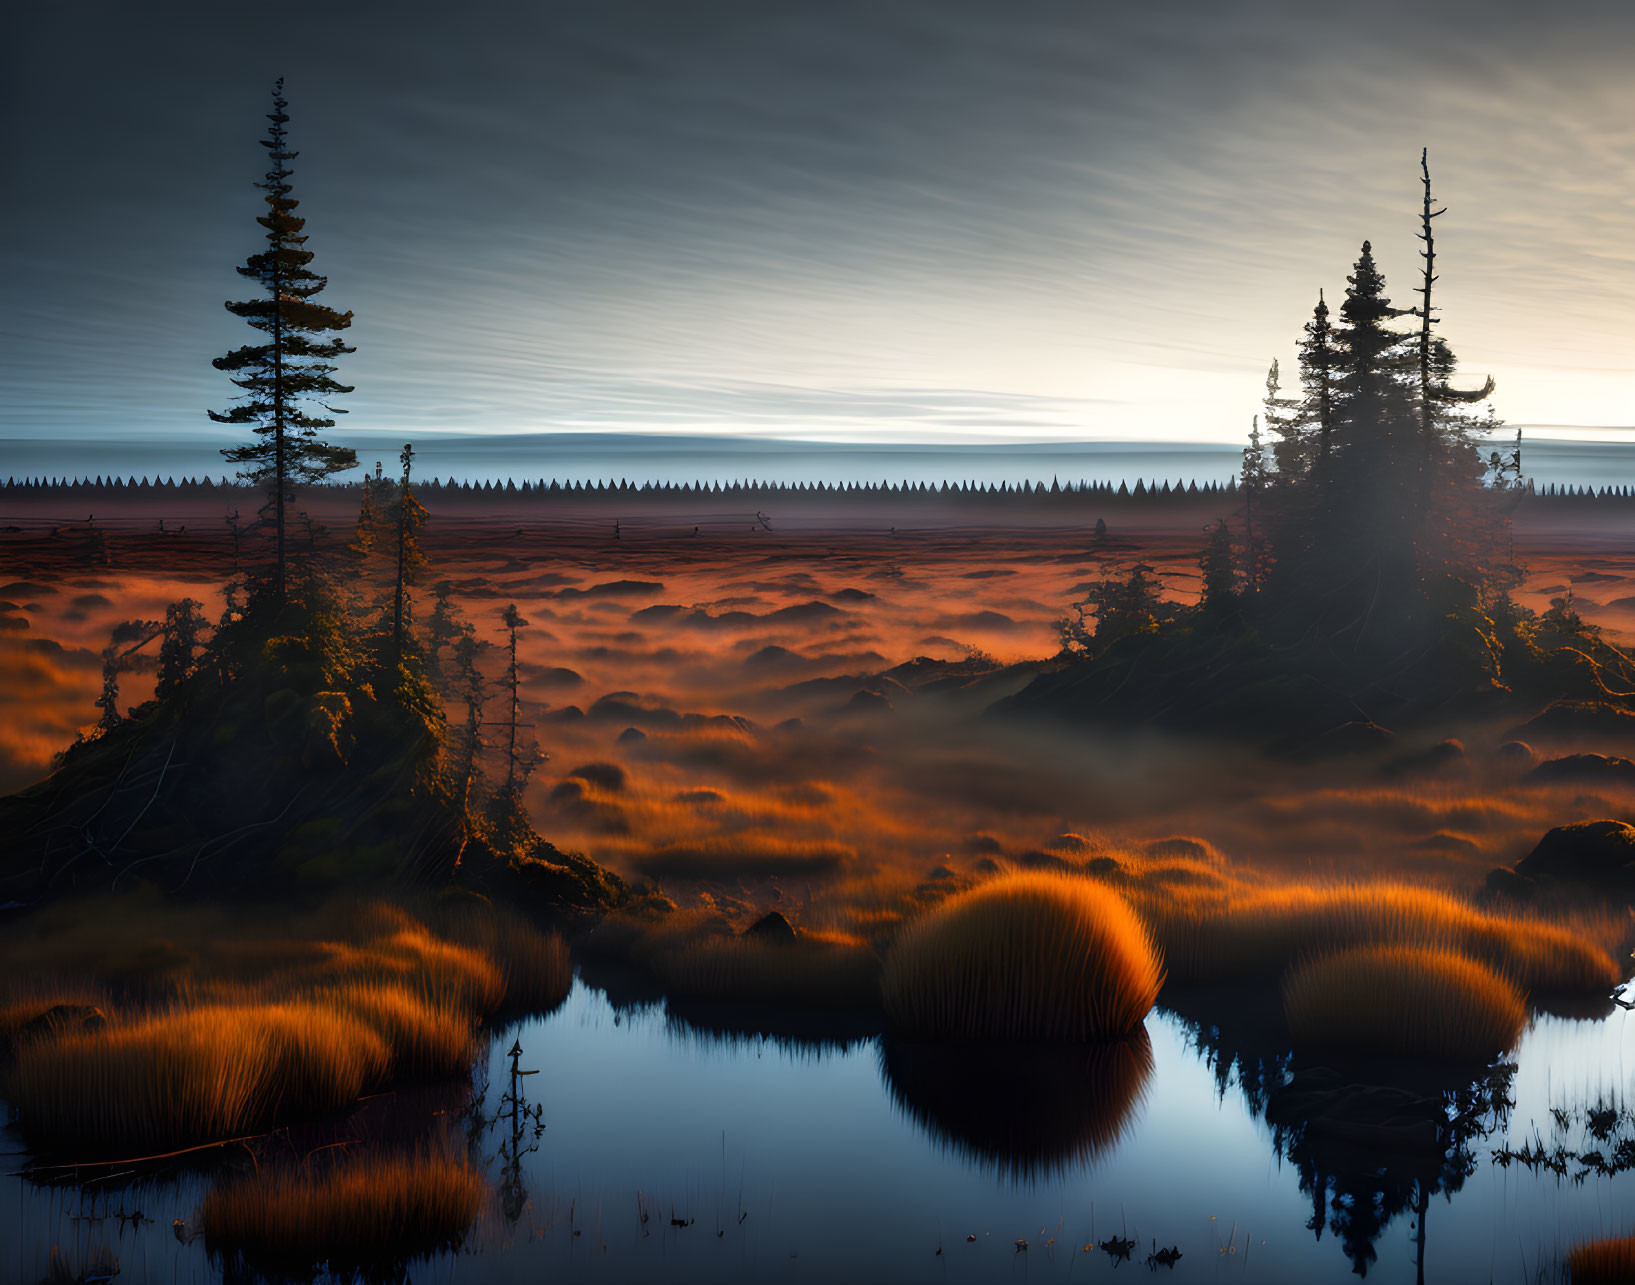 Tranquil landscape with coniferous trees reflected in still water under twilight sky